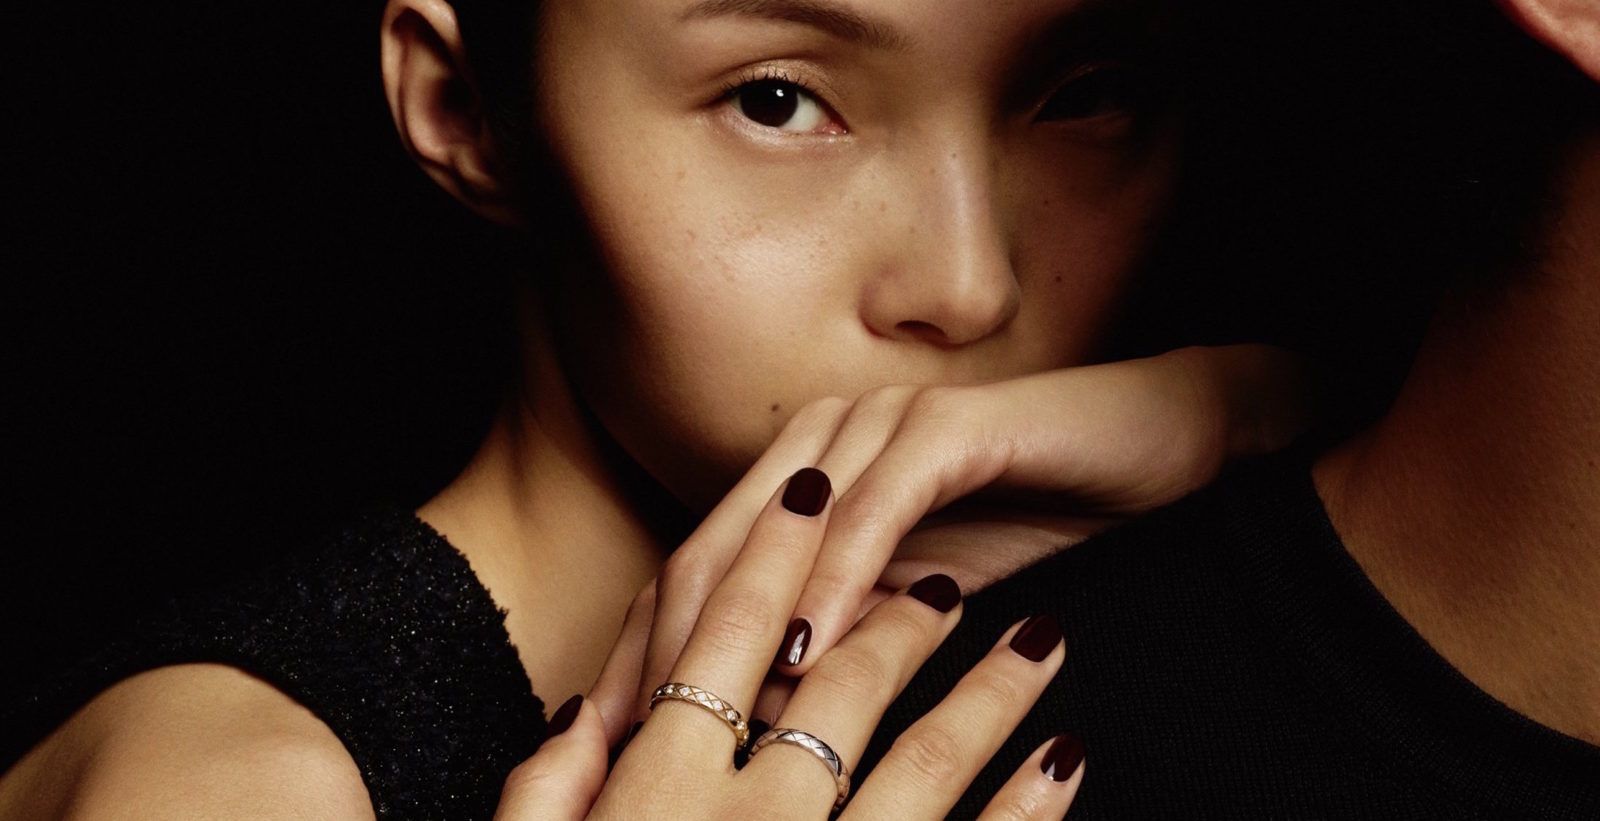 Chanel’s new Coco Crush jewellery is our latest obsession